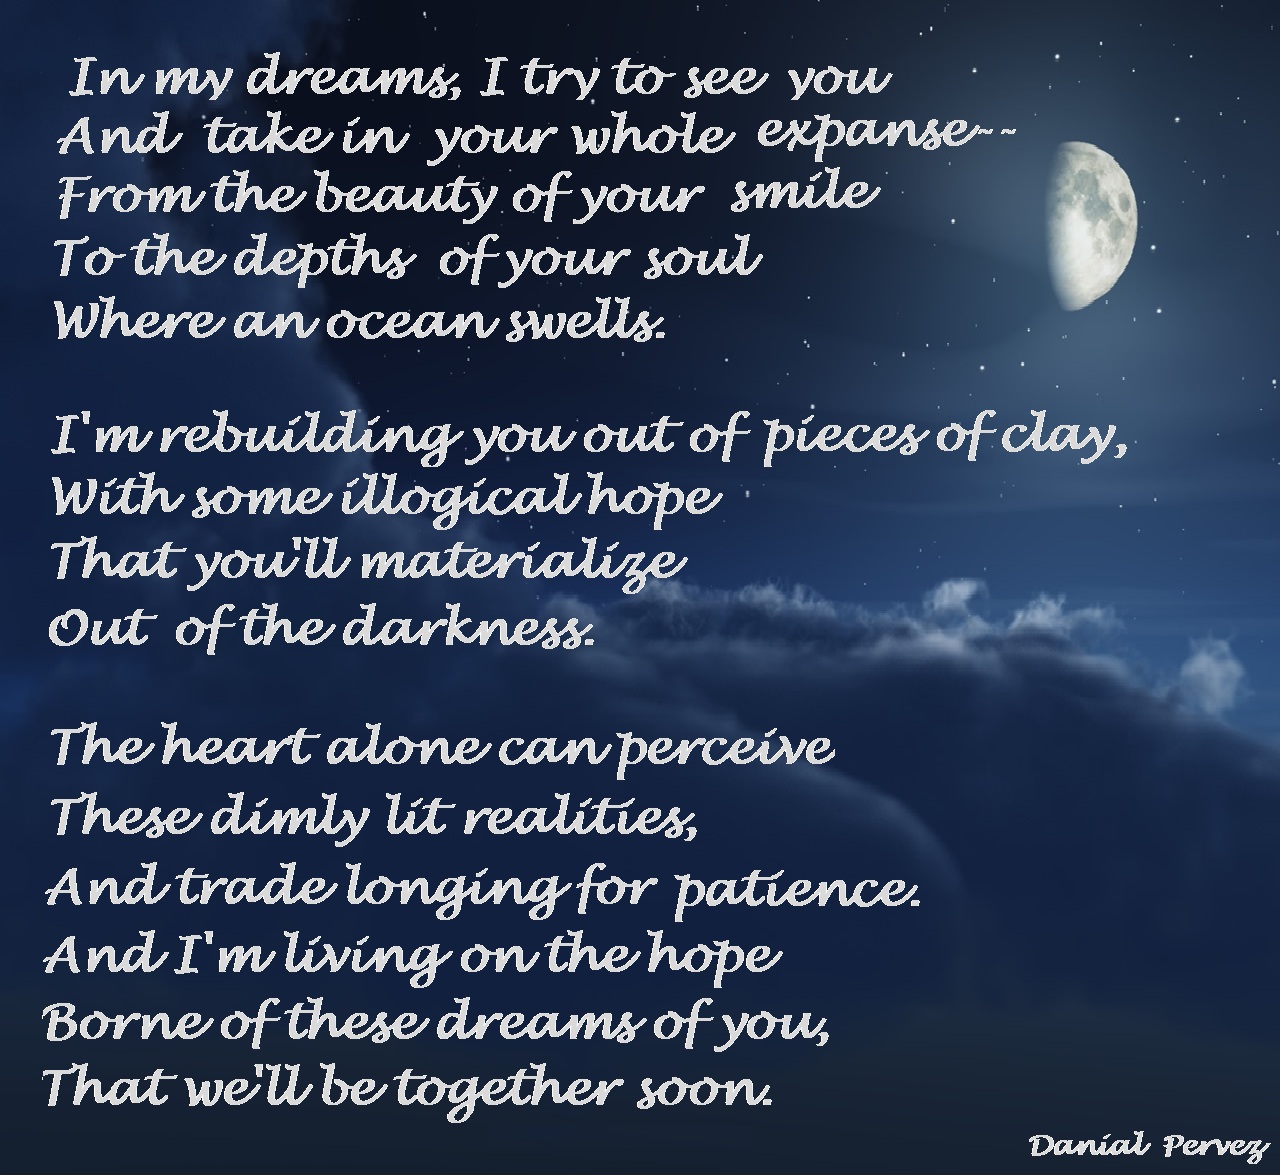 Knowledge Channel: A Dream to Wish Come True ~ Poem